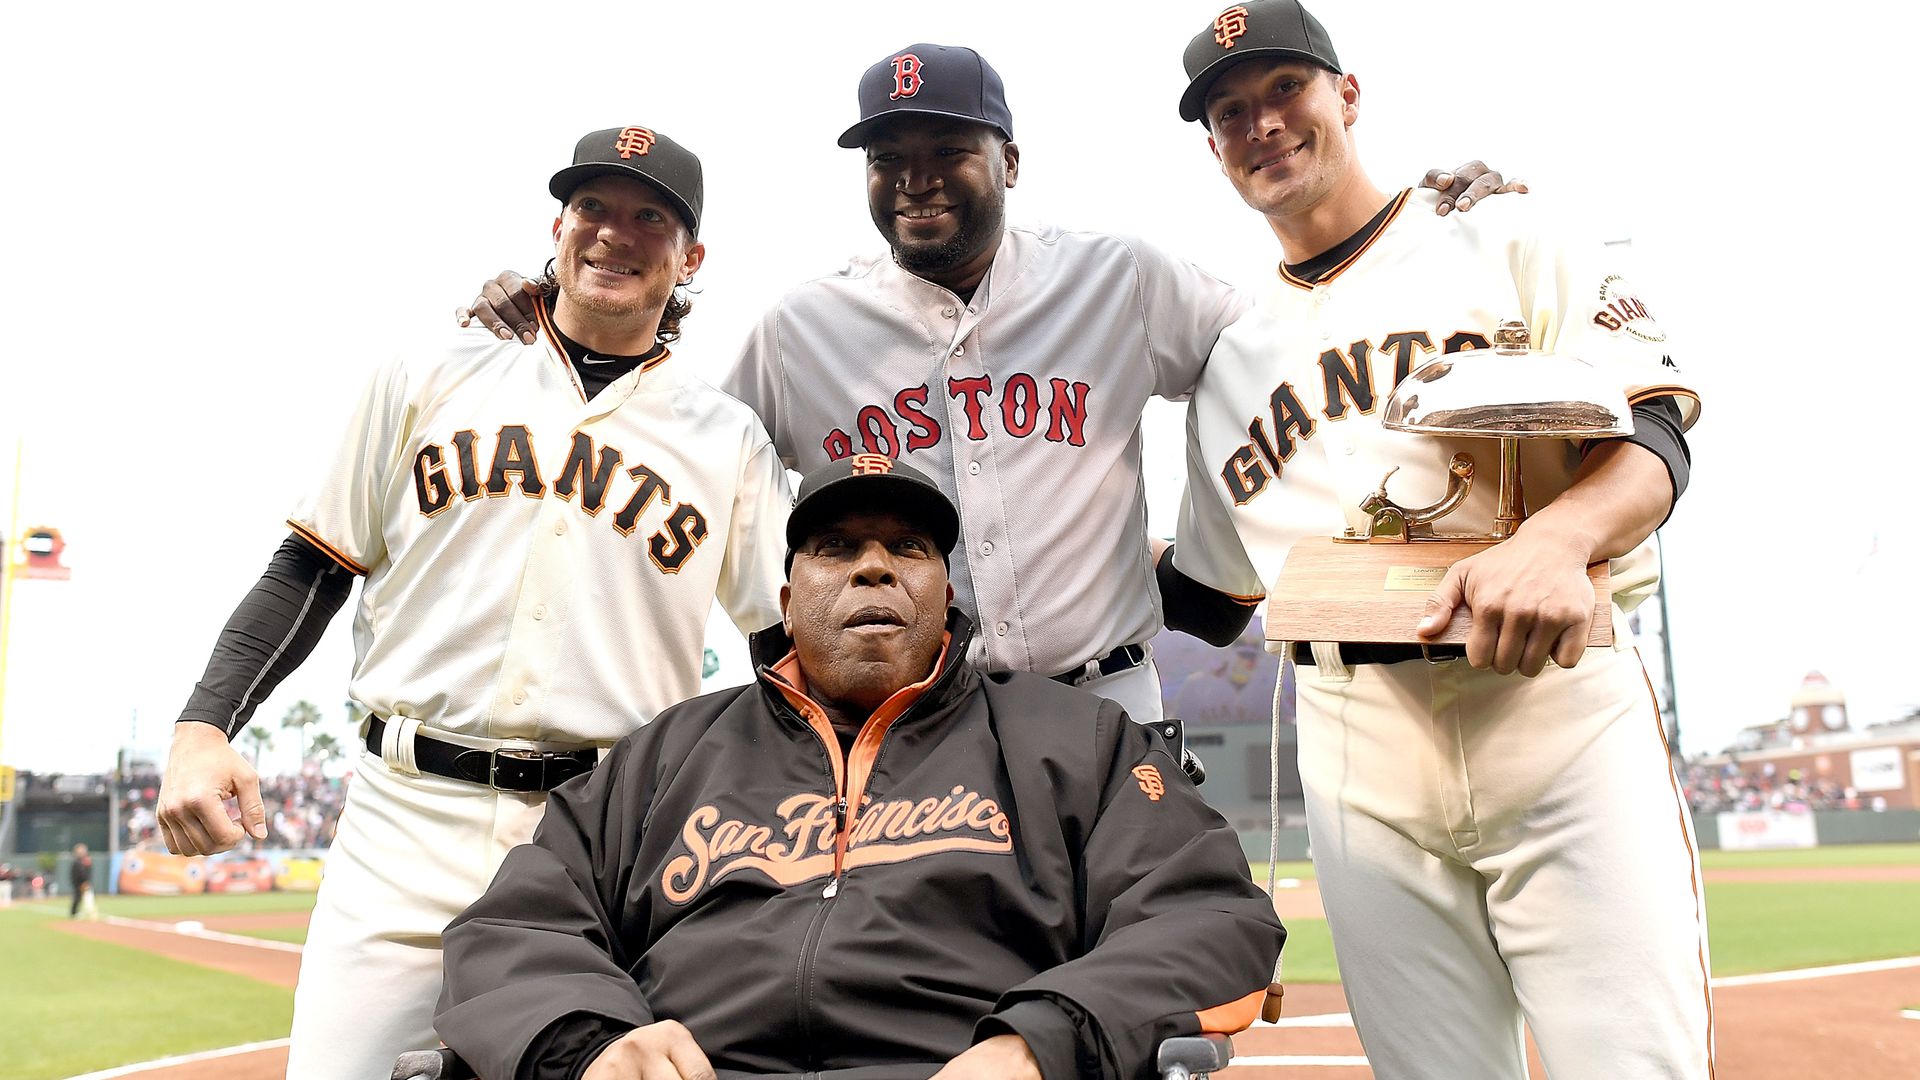 Willie McCovey, in a wheelchair, posing with Jake Peavy, Javier Lopez, and David Ortiz